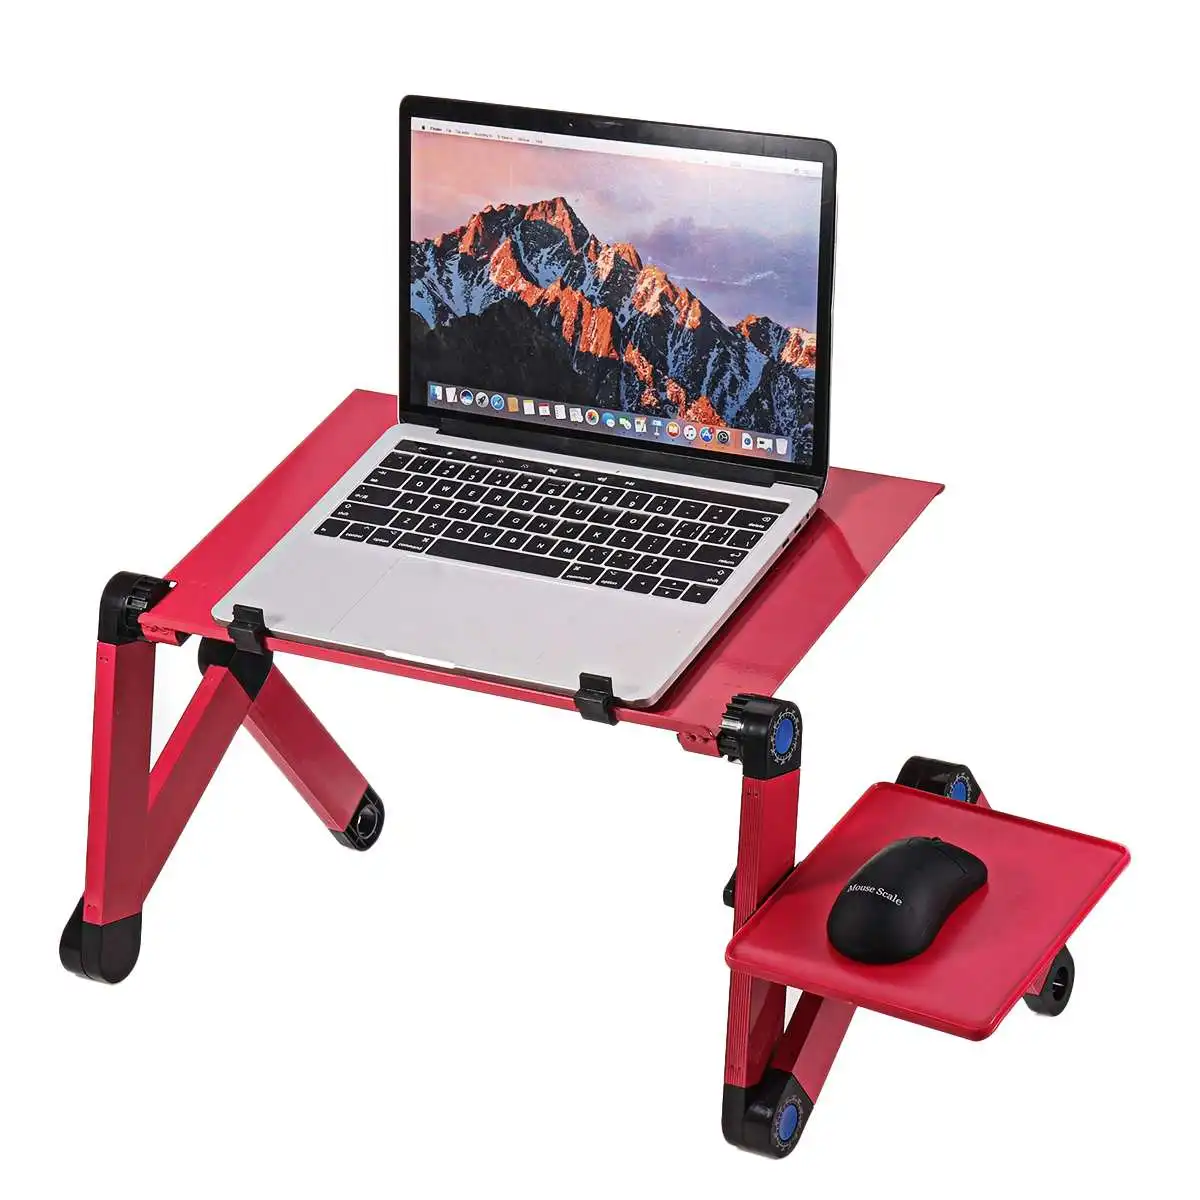 Portable Bed or Sofa Adjustable Laptop Desk with Mouse Pad and Fan